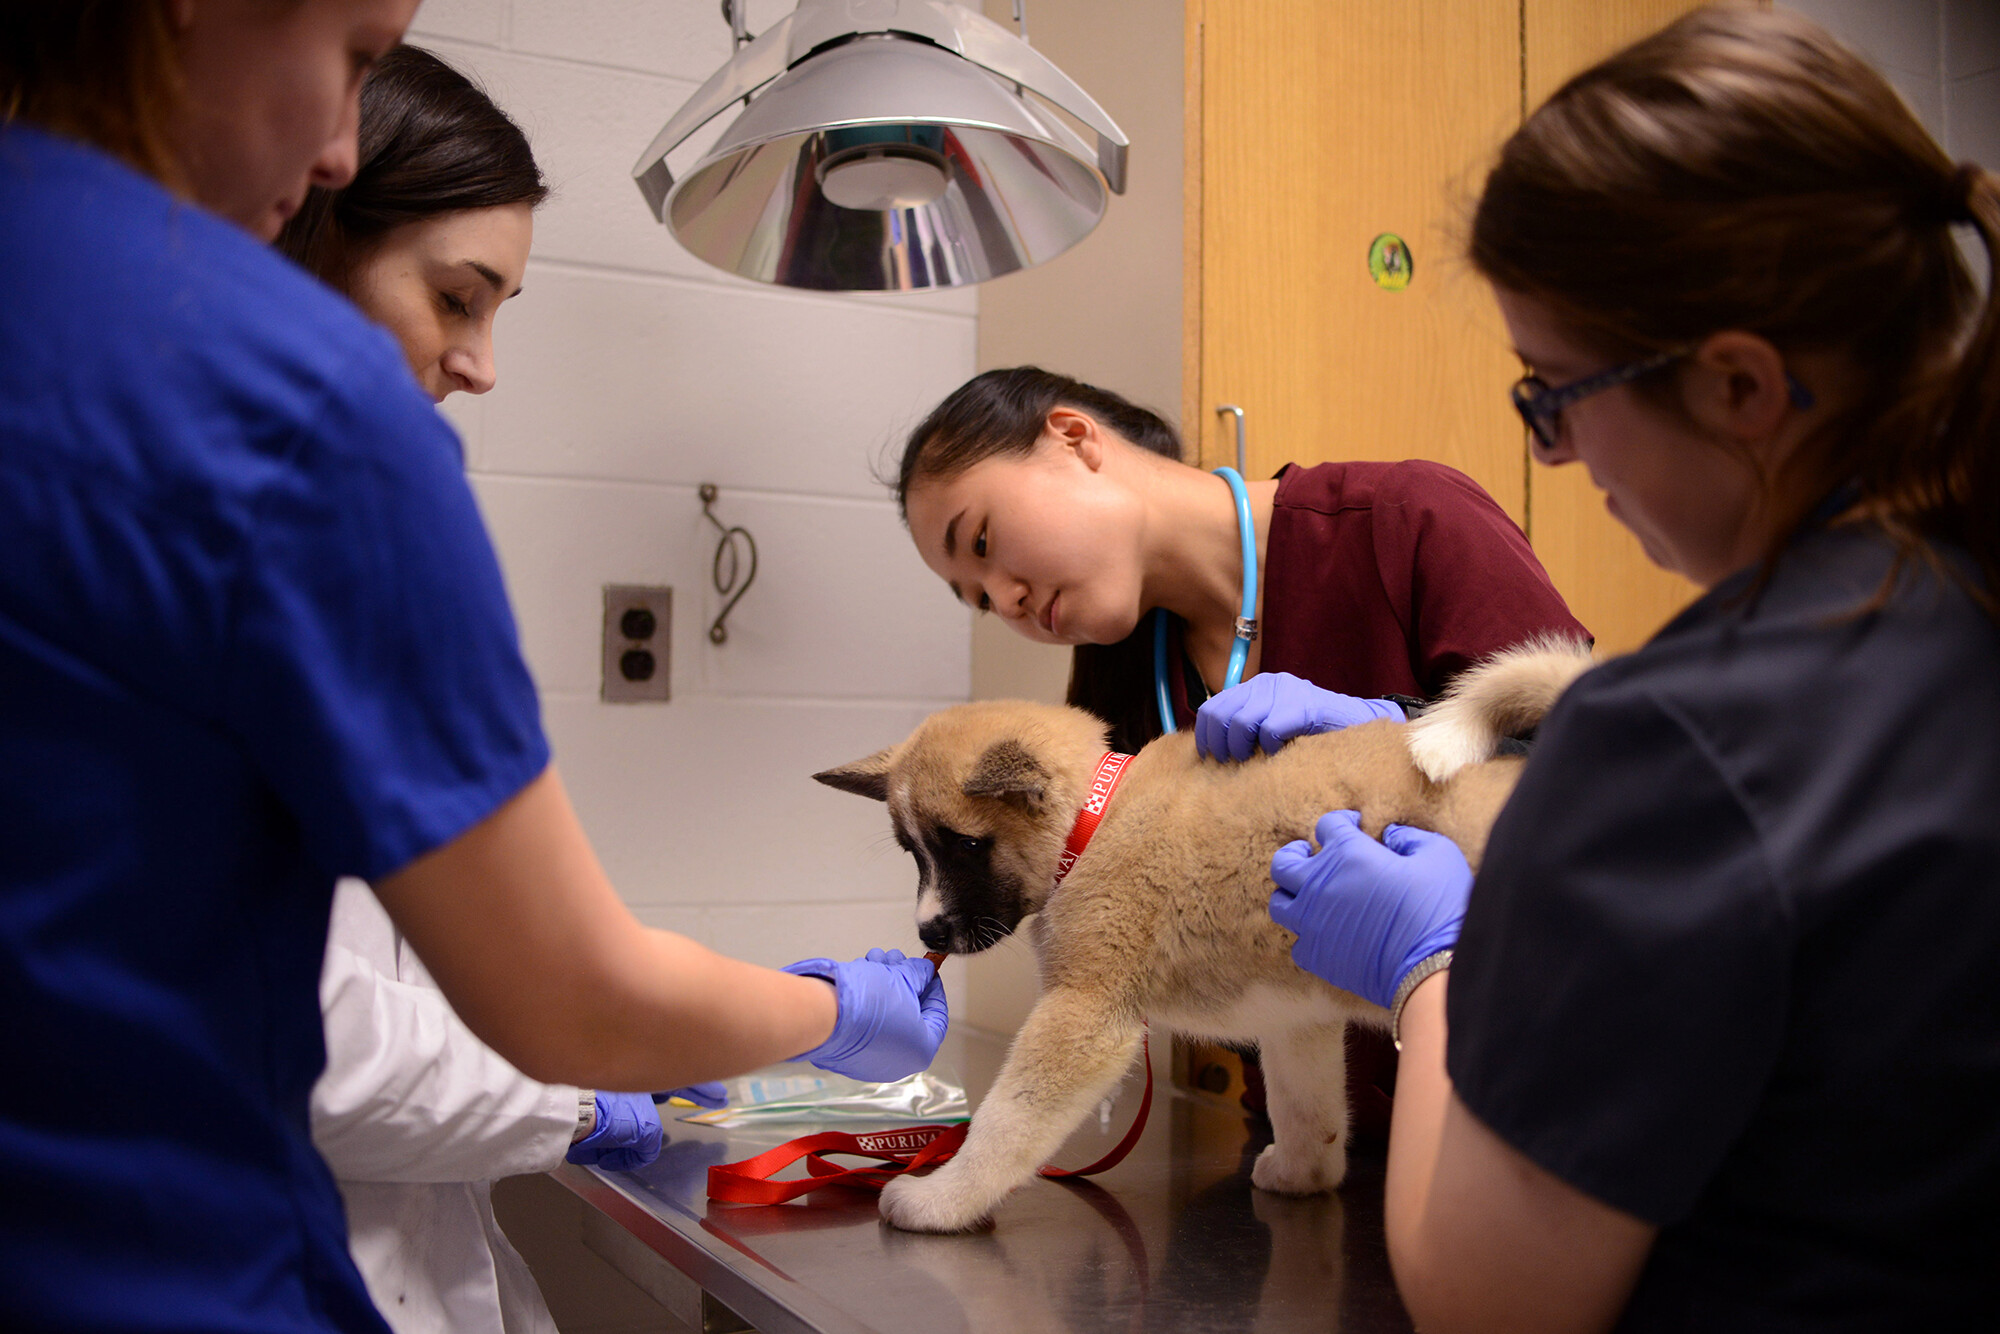 Four members of Penn's medical community look at and hold a dog on an exam table, one offers the dog a treat